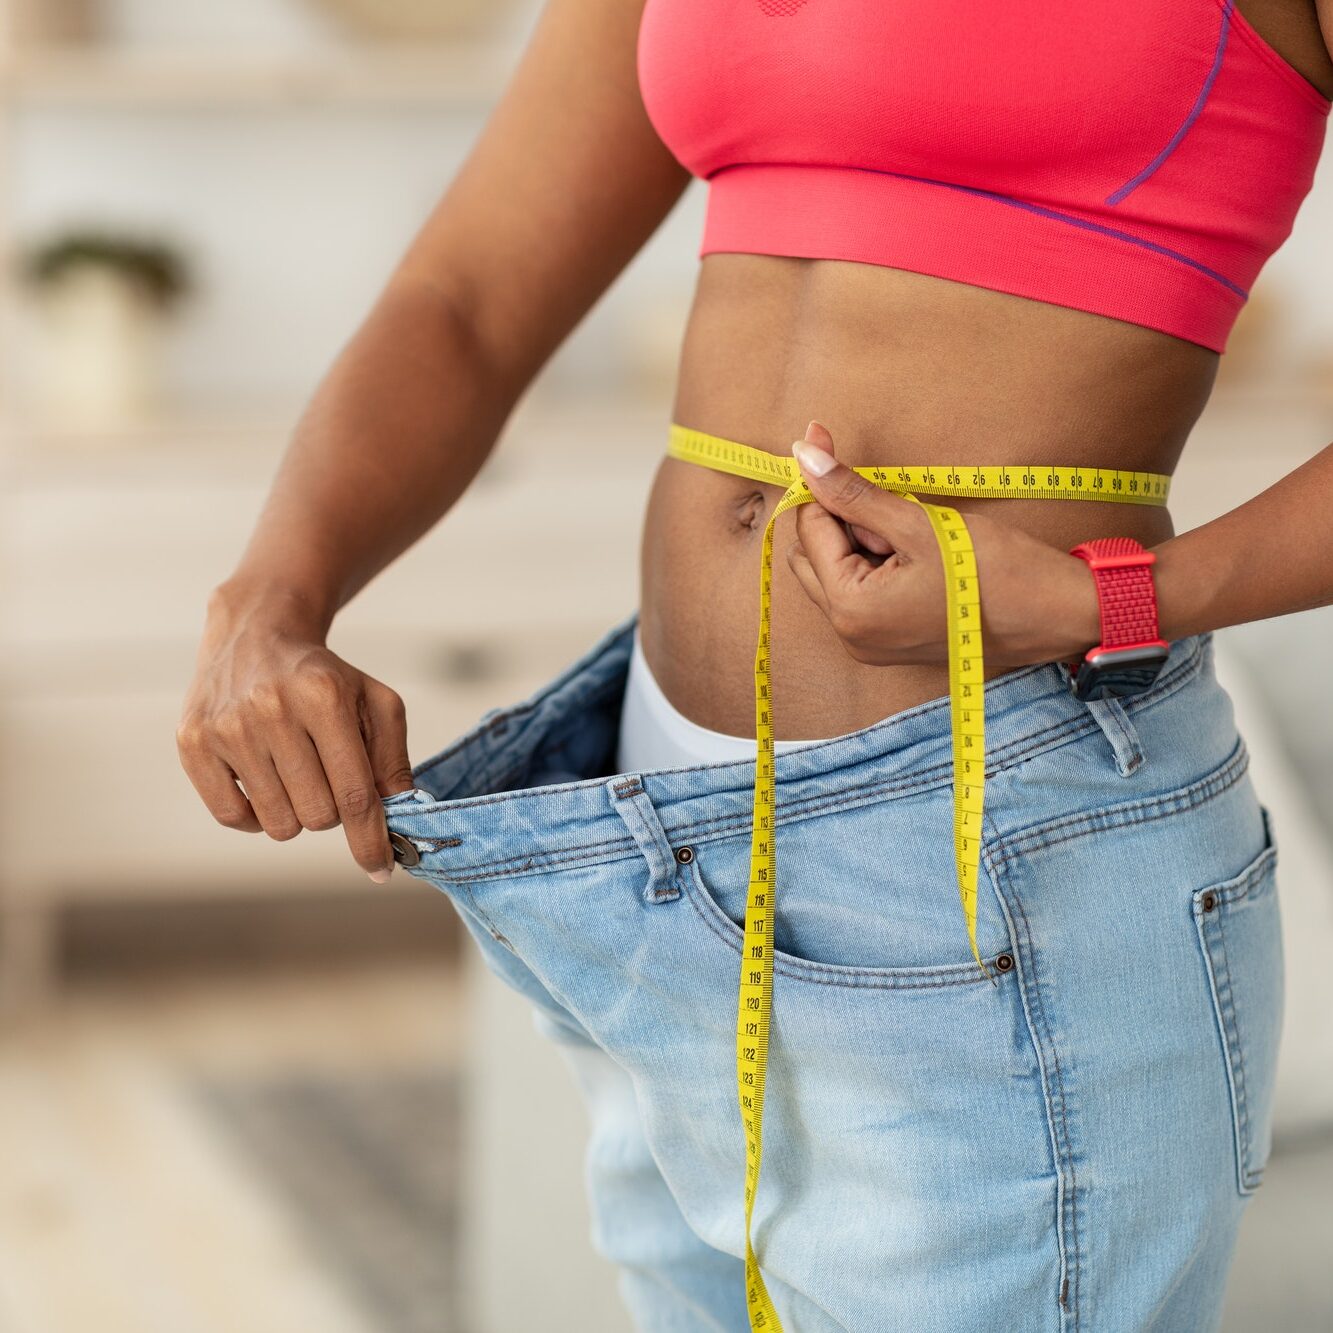 Woman After Weight-Loss Measuring Waist Wearing Oversize Jeans Indoors, Cropped